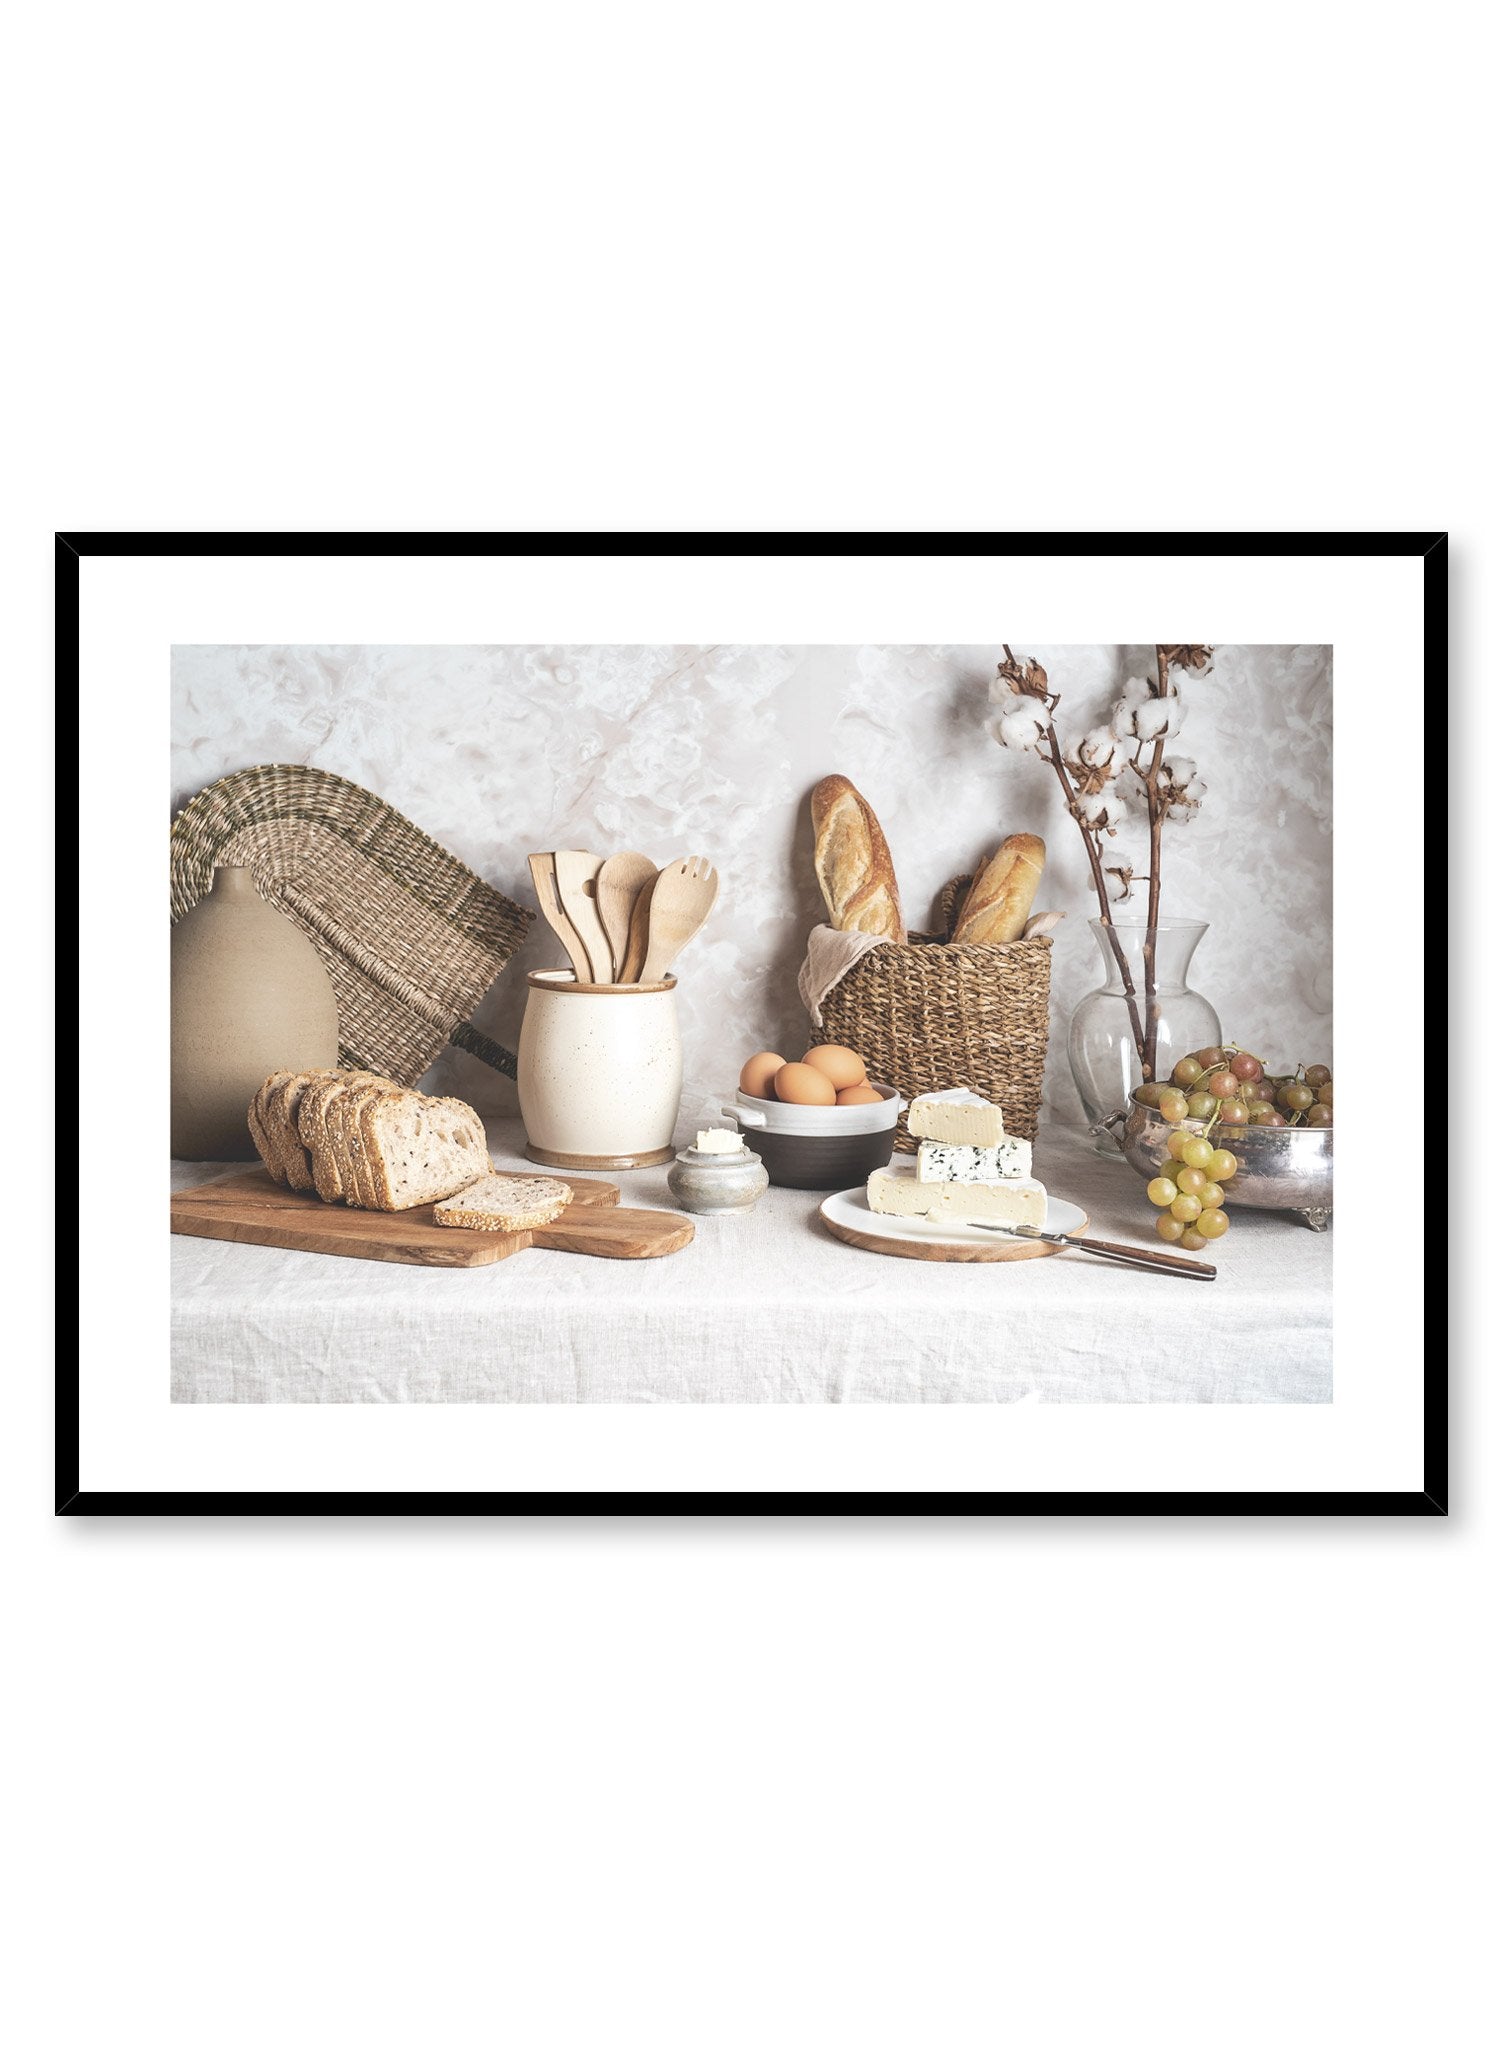 Ode to Carbs is a food still life photography poster with bread, butter and cheese by Opposite Wall. 